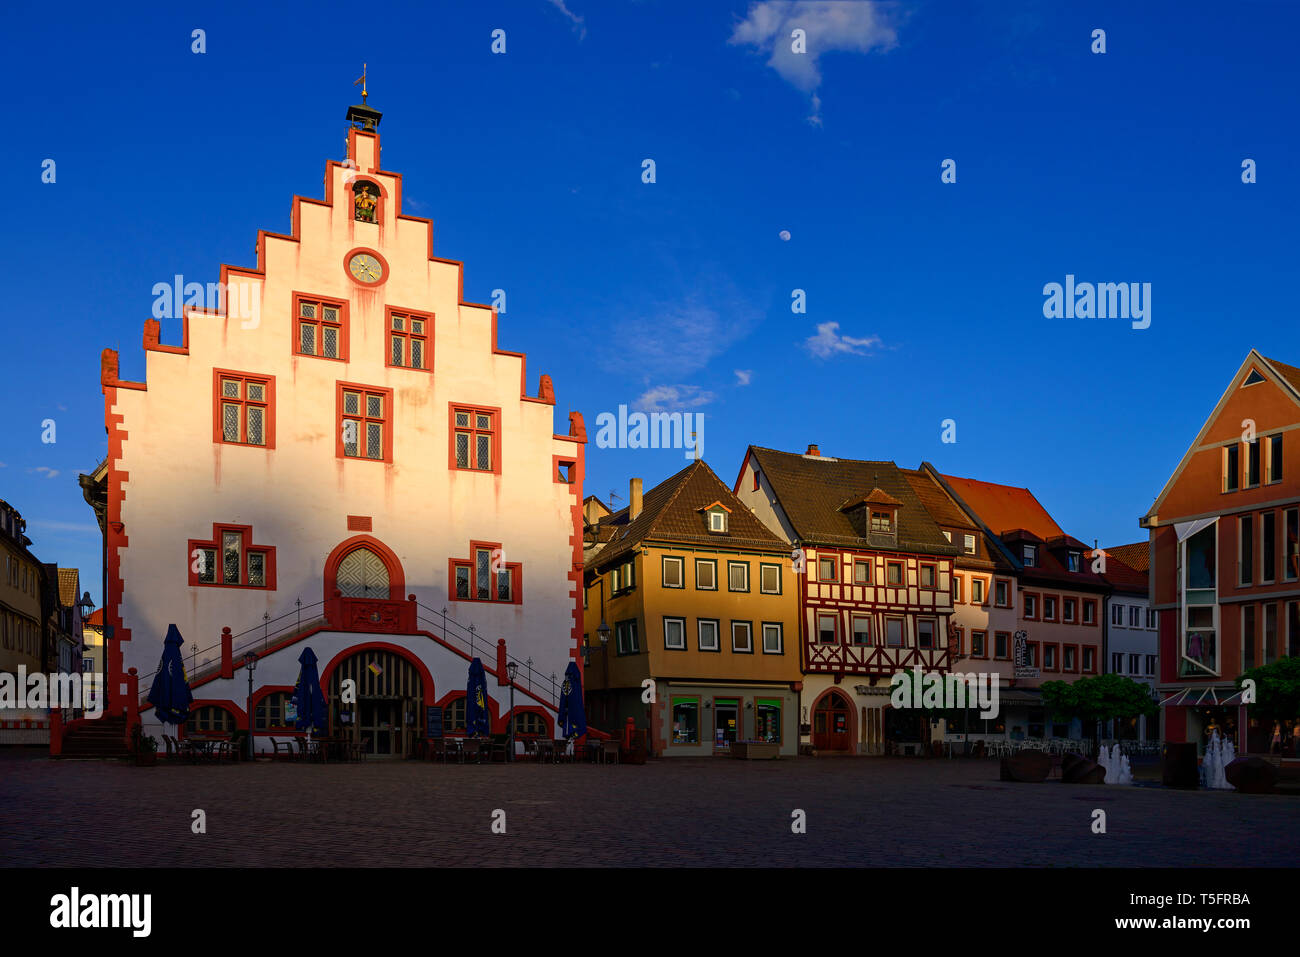 Germany, Bavaria, Karlstadt, town hall and market square in the evening light Stock Photo